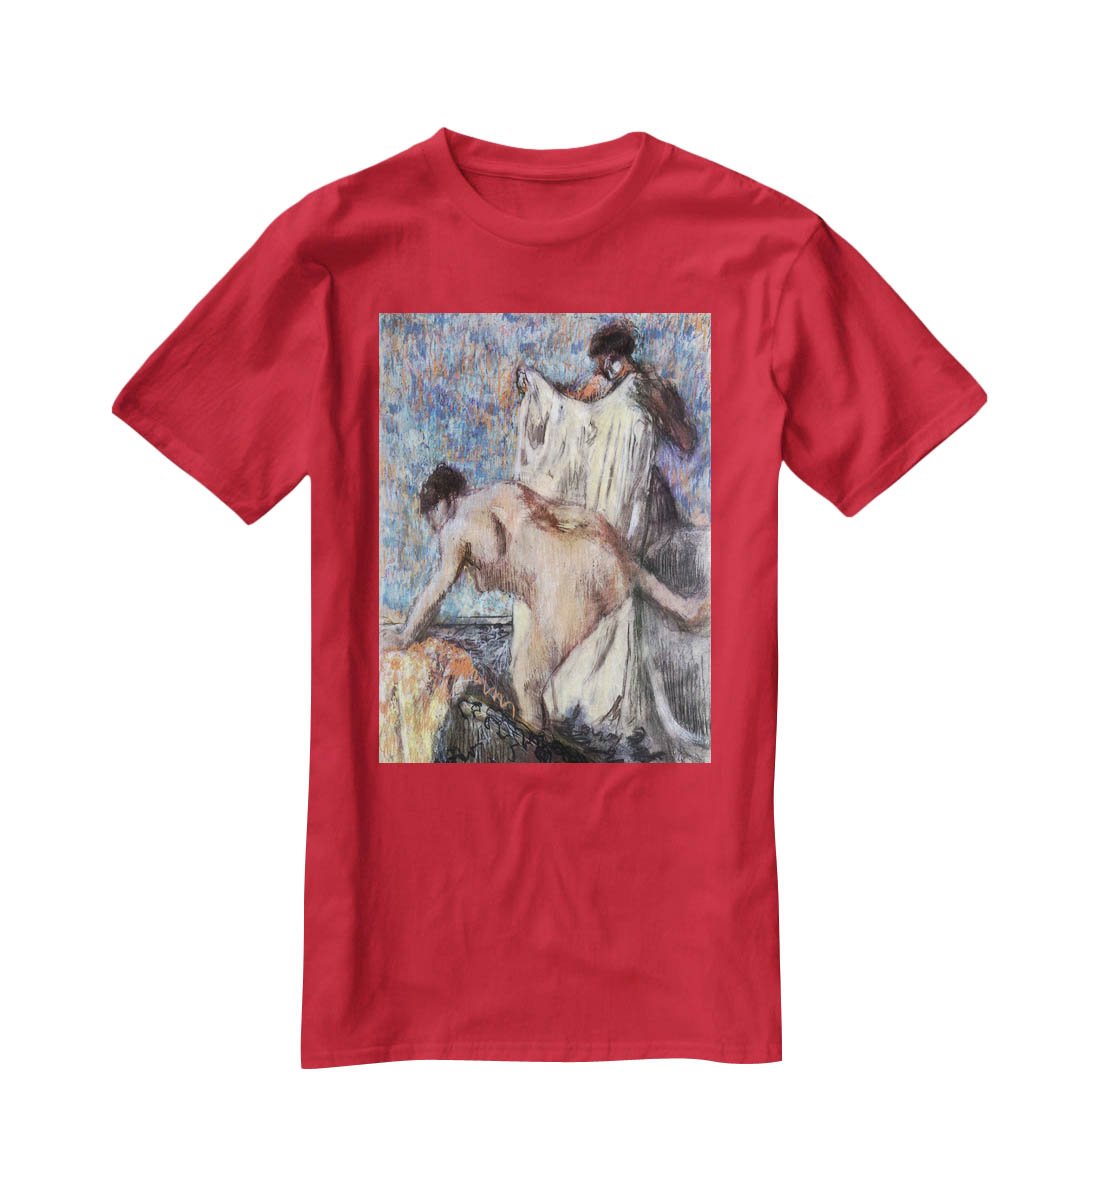 After bathing 3 by Degas T-Shirt - Canvas Art Rocks - 4